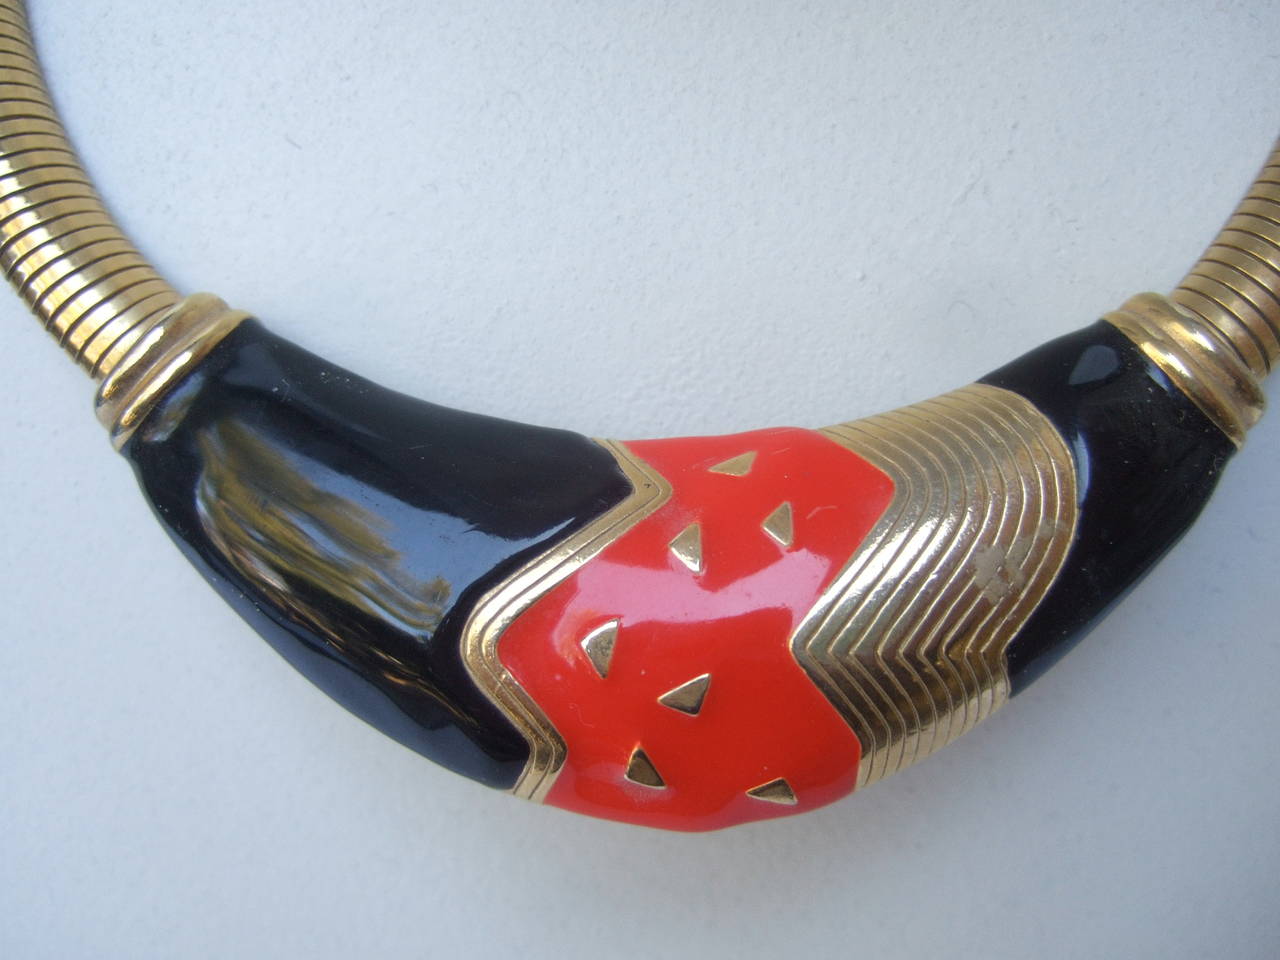 Sleek black & red enamel gilt metal choker style necklace c 1980
The stylish necklace is designed with a bold abstract center plaque
The red & black enamel is juxtaposed with gilt metal accents

The necklace transitions into wide gilt metal